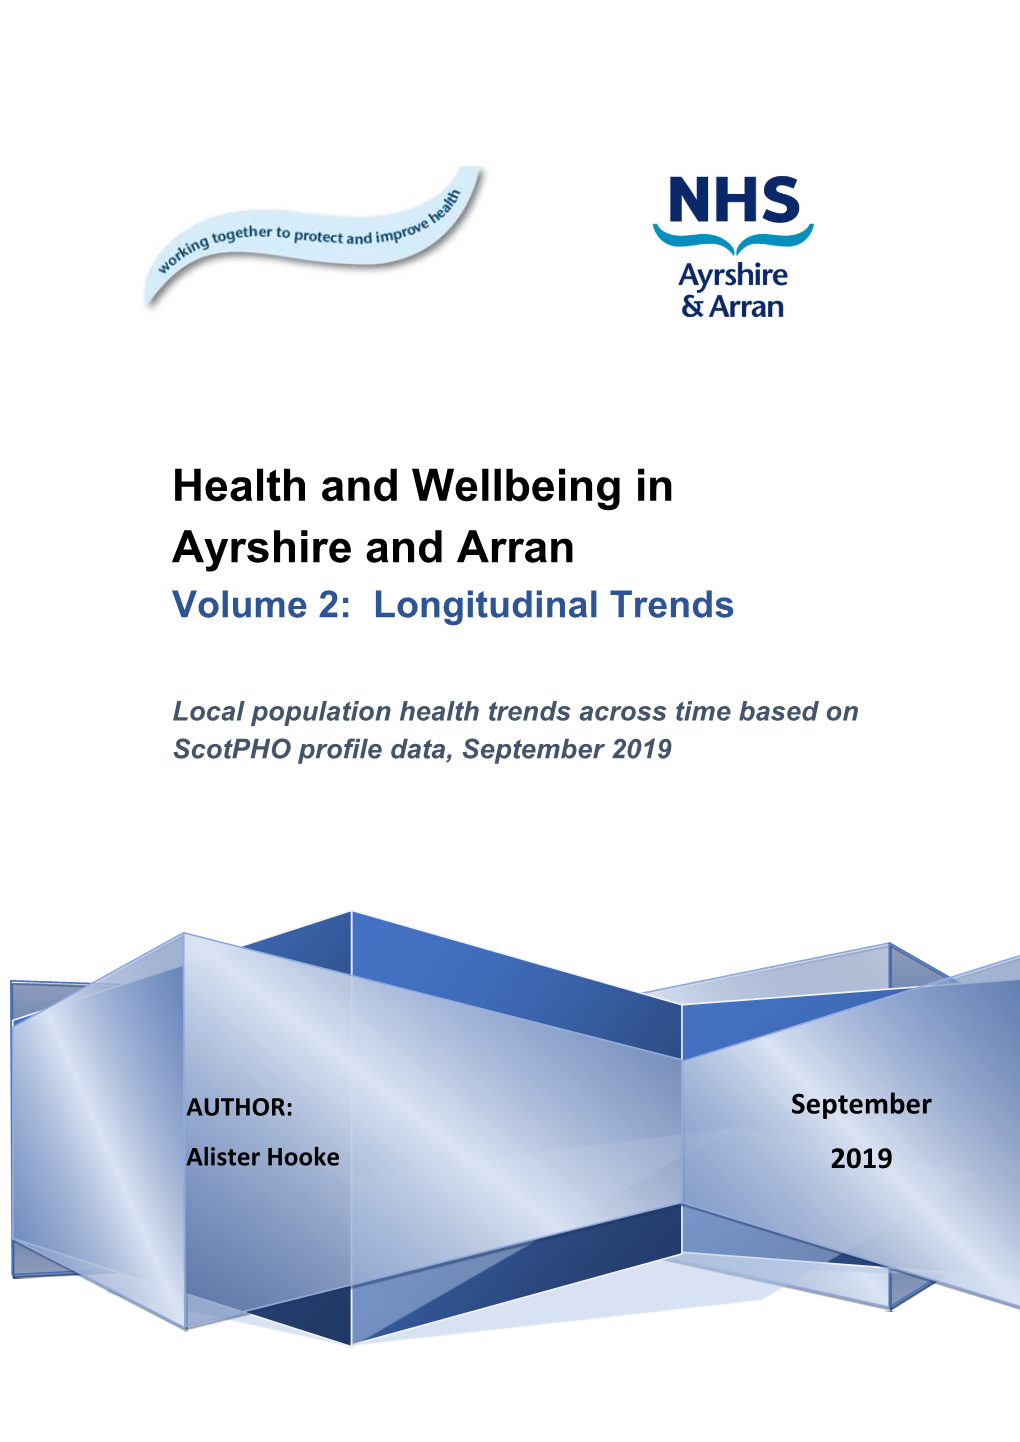 Health and Wellbeing in Ayrshire and Arran Volume 2: Longitudinal Trends